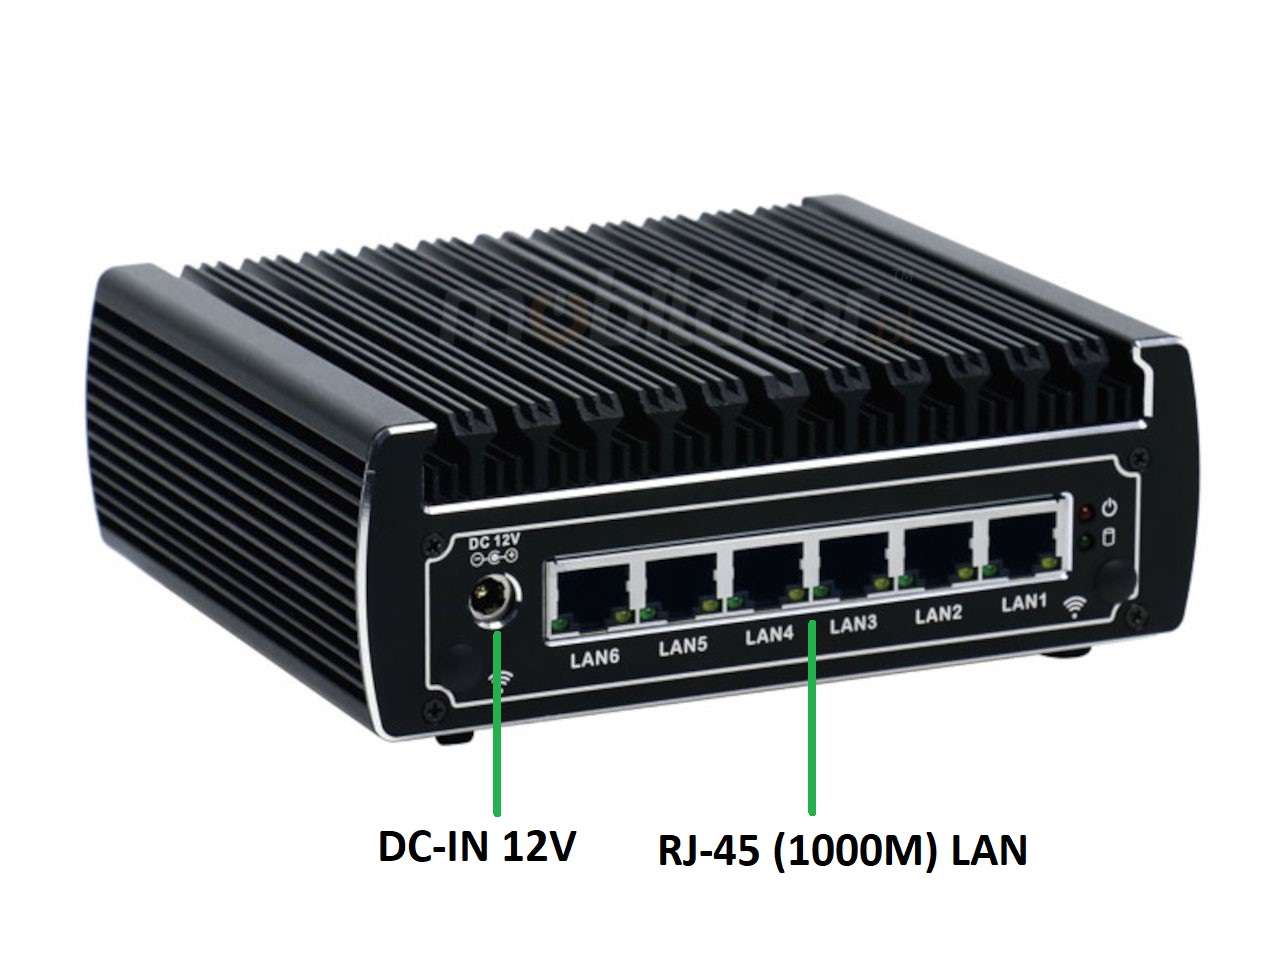  IBOX N133 v.2, back IO, industrial small fast reliable intel fanless industrial small LAN INTEL i3 SSD DDR4